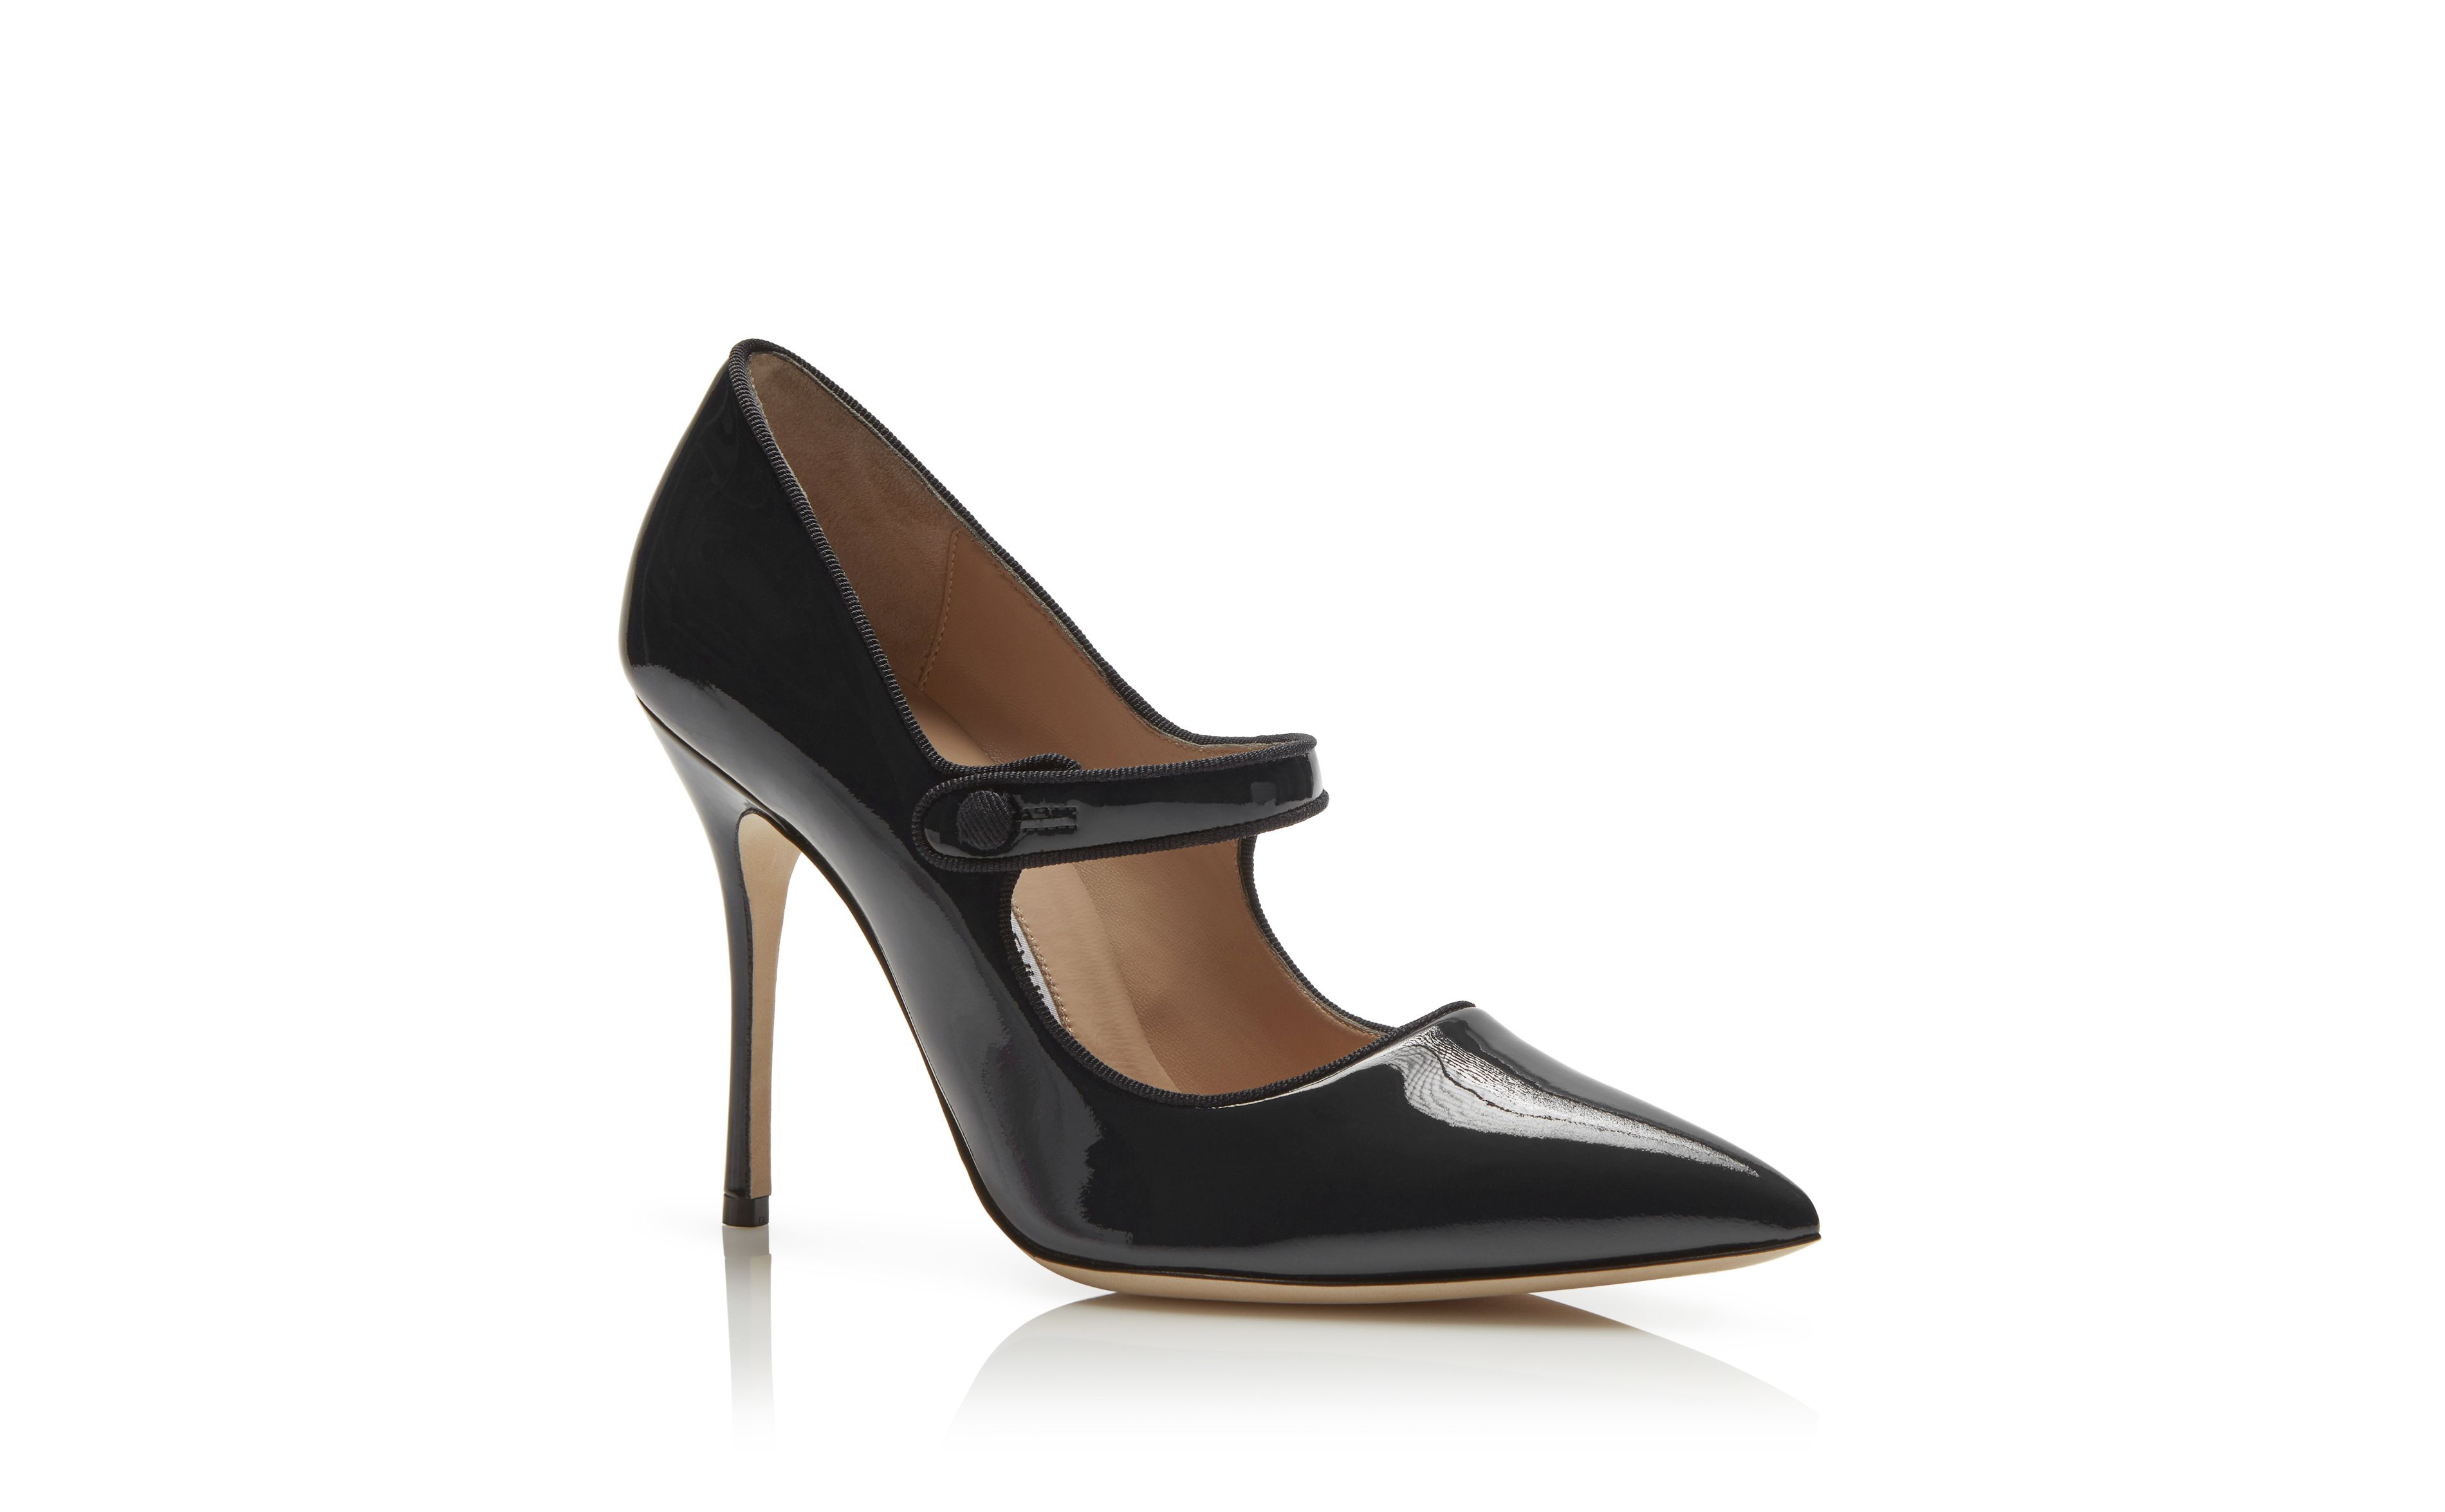 Designer Black Patent Leather Pointed Toe Pumps - Image Upsell